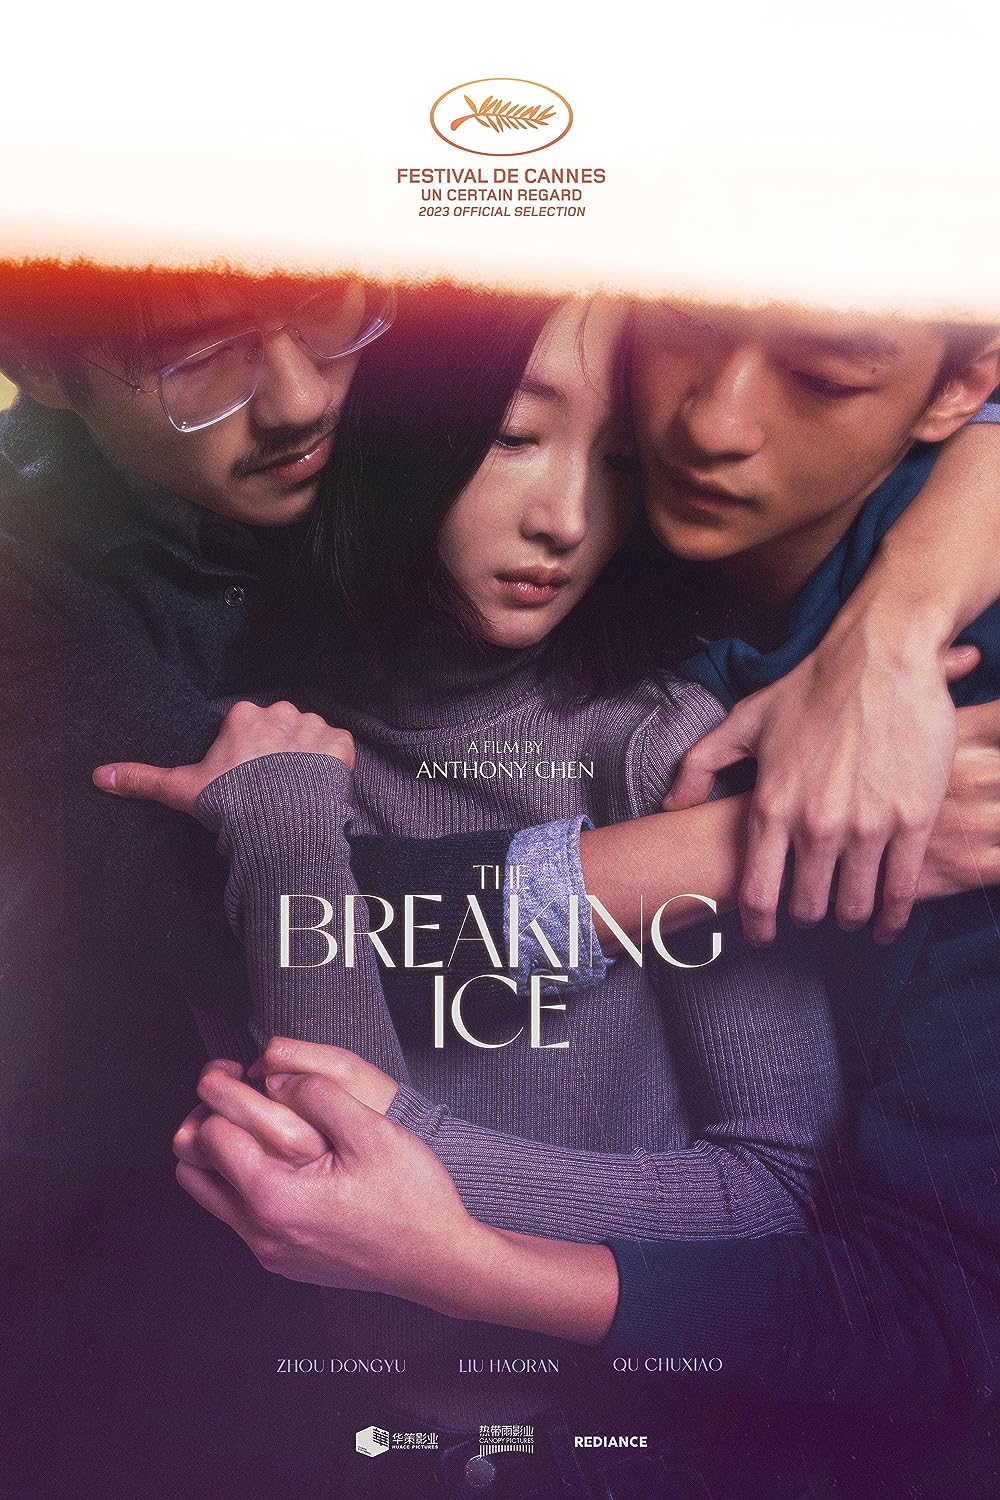 The breaking ice - BIFF 2023 POSTER